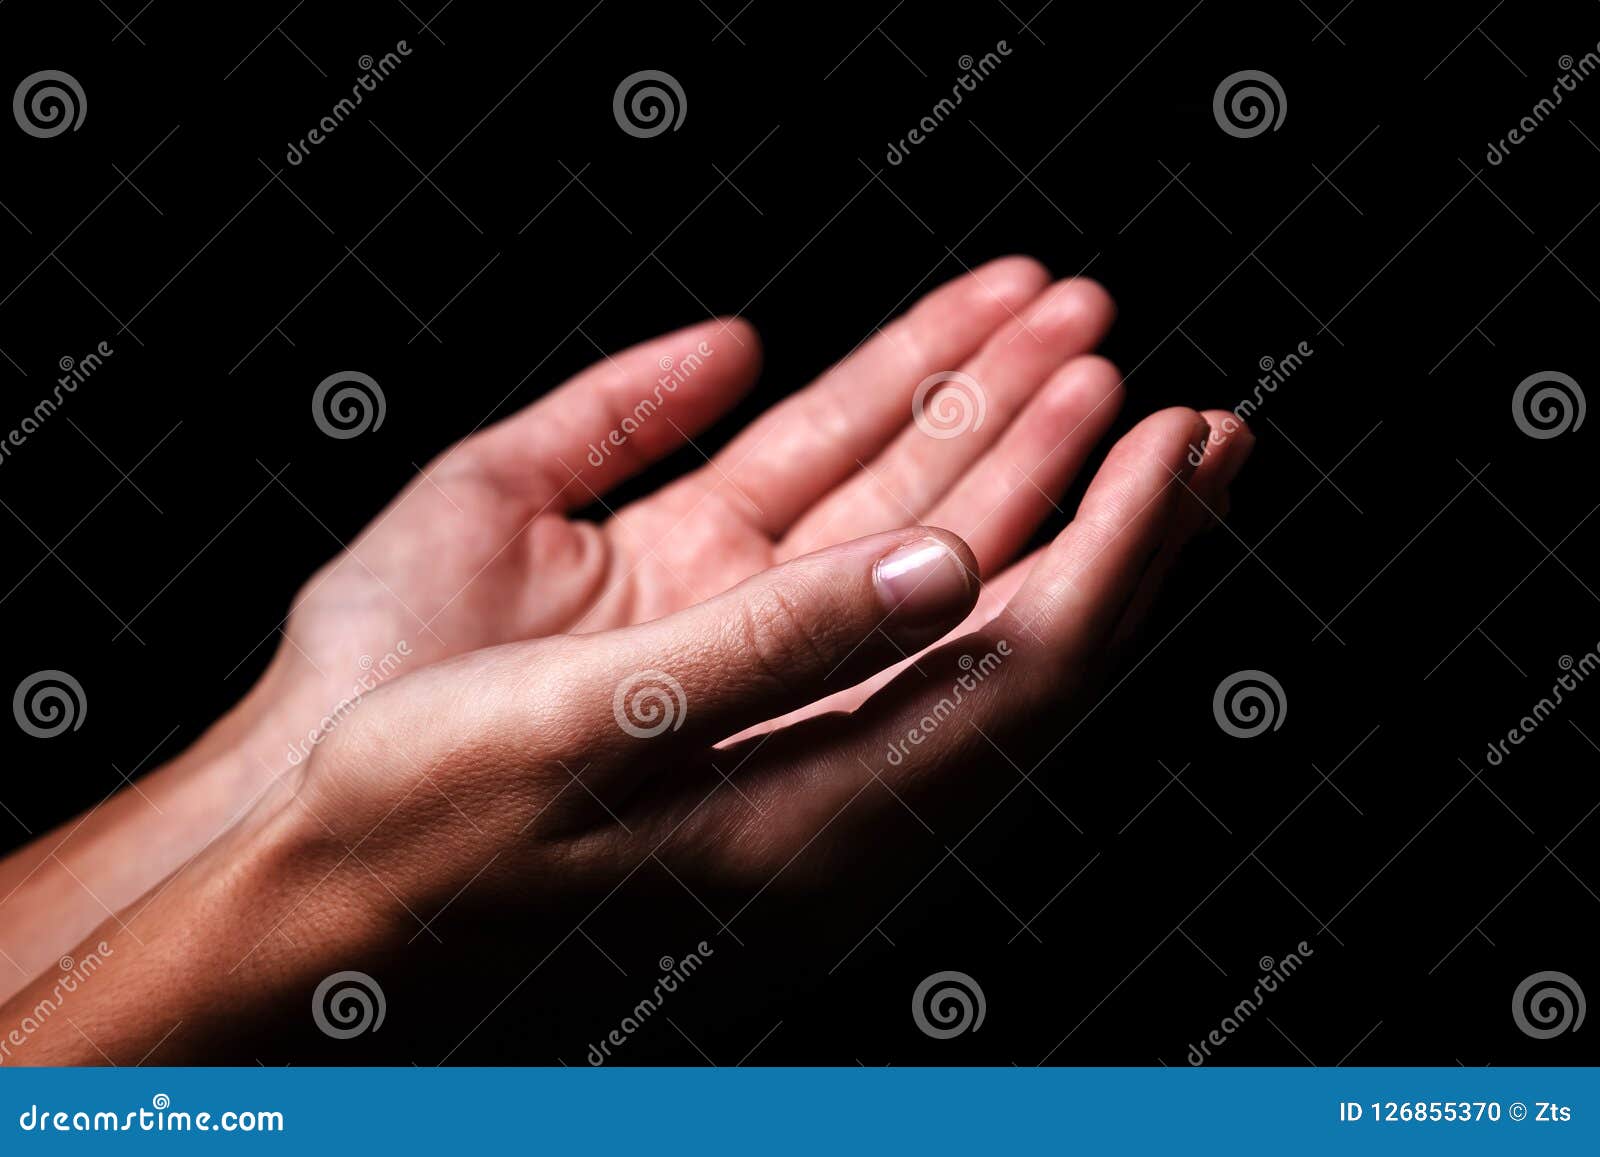 female hands praying with palms up arms outstretched. black background